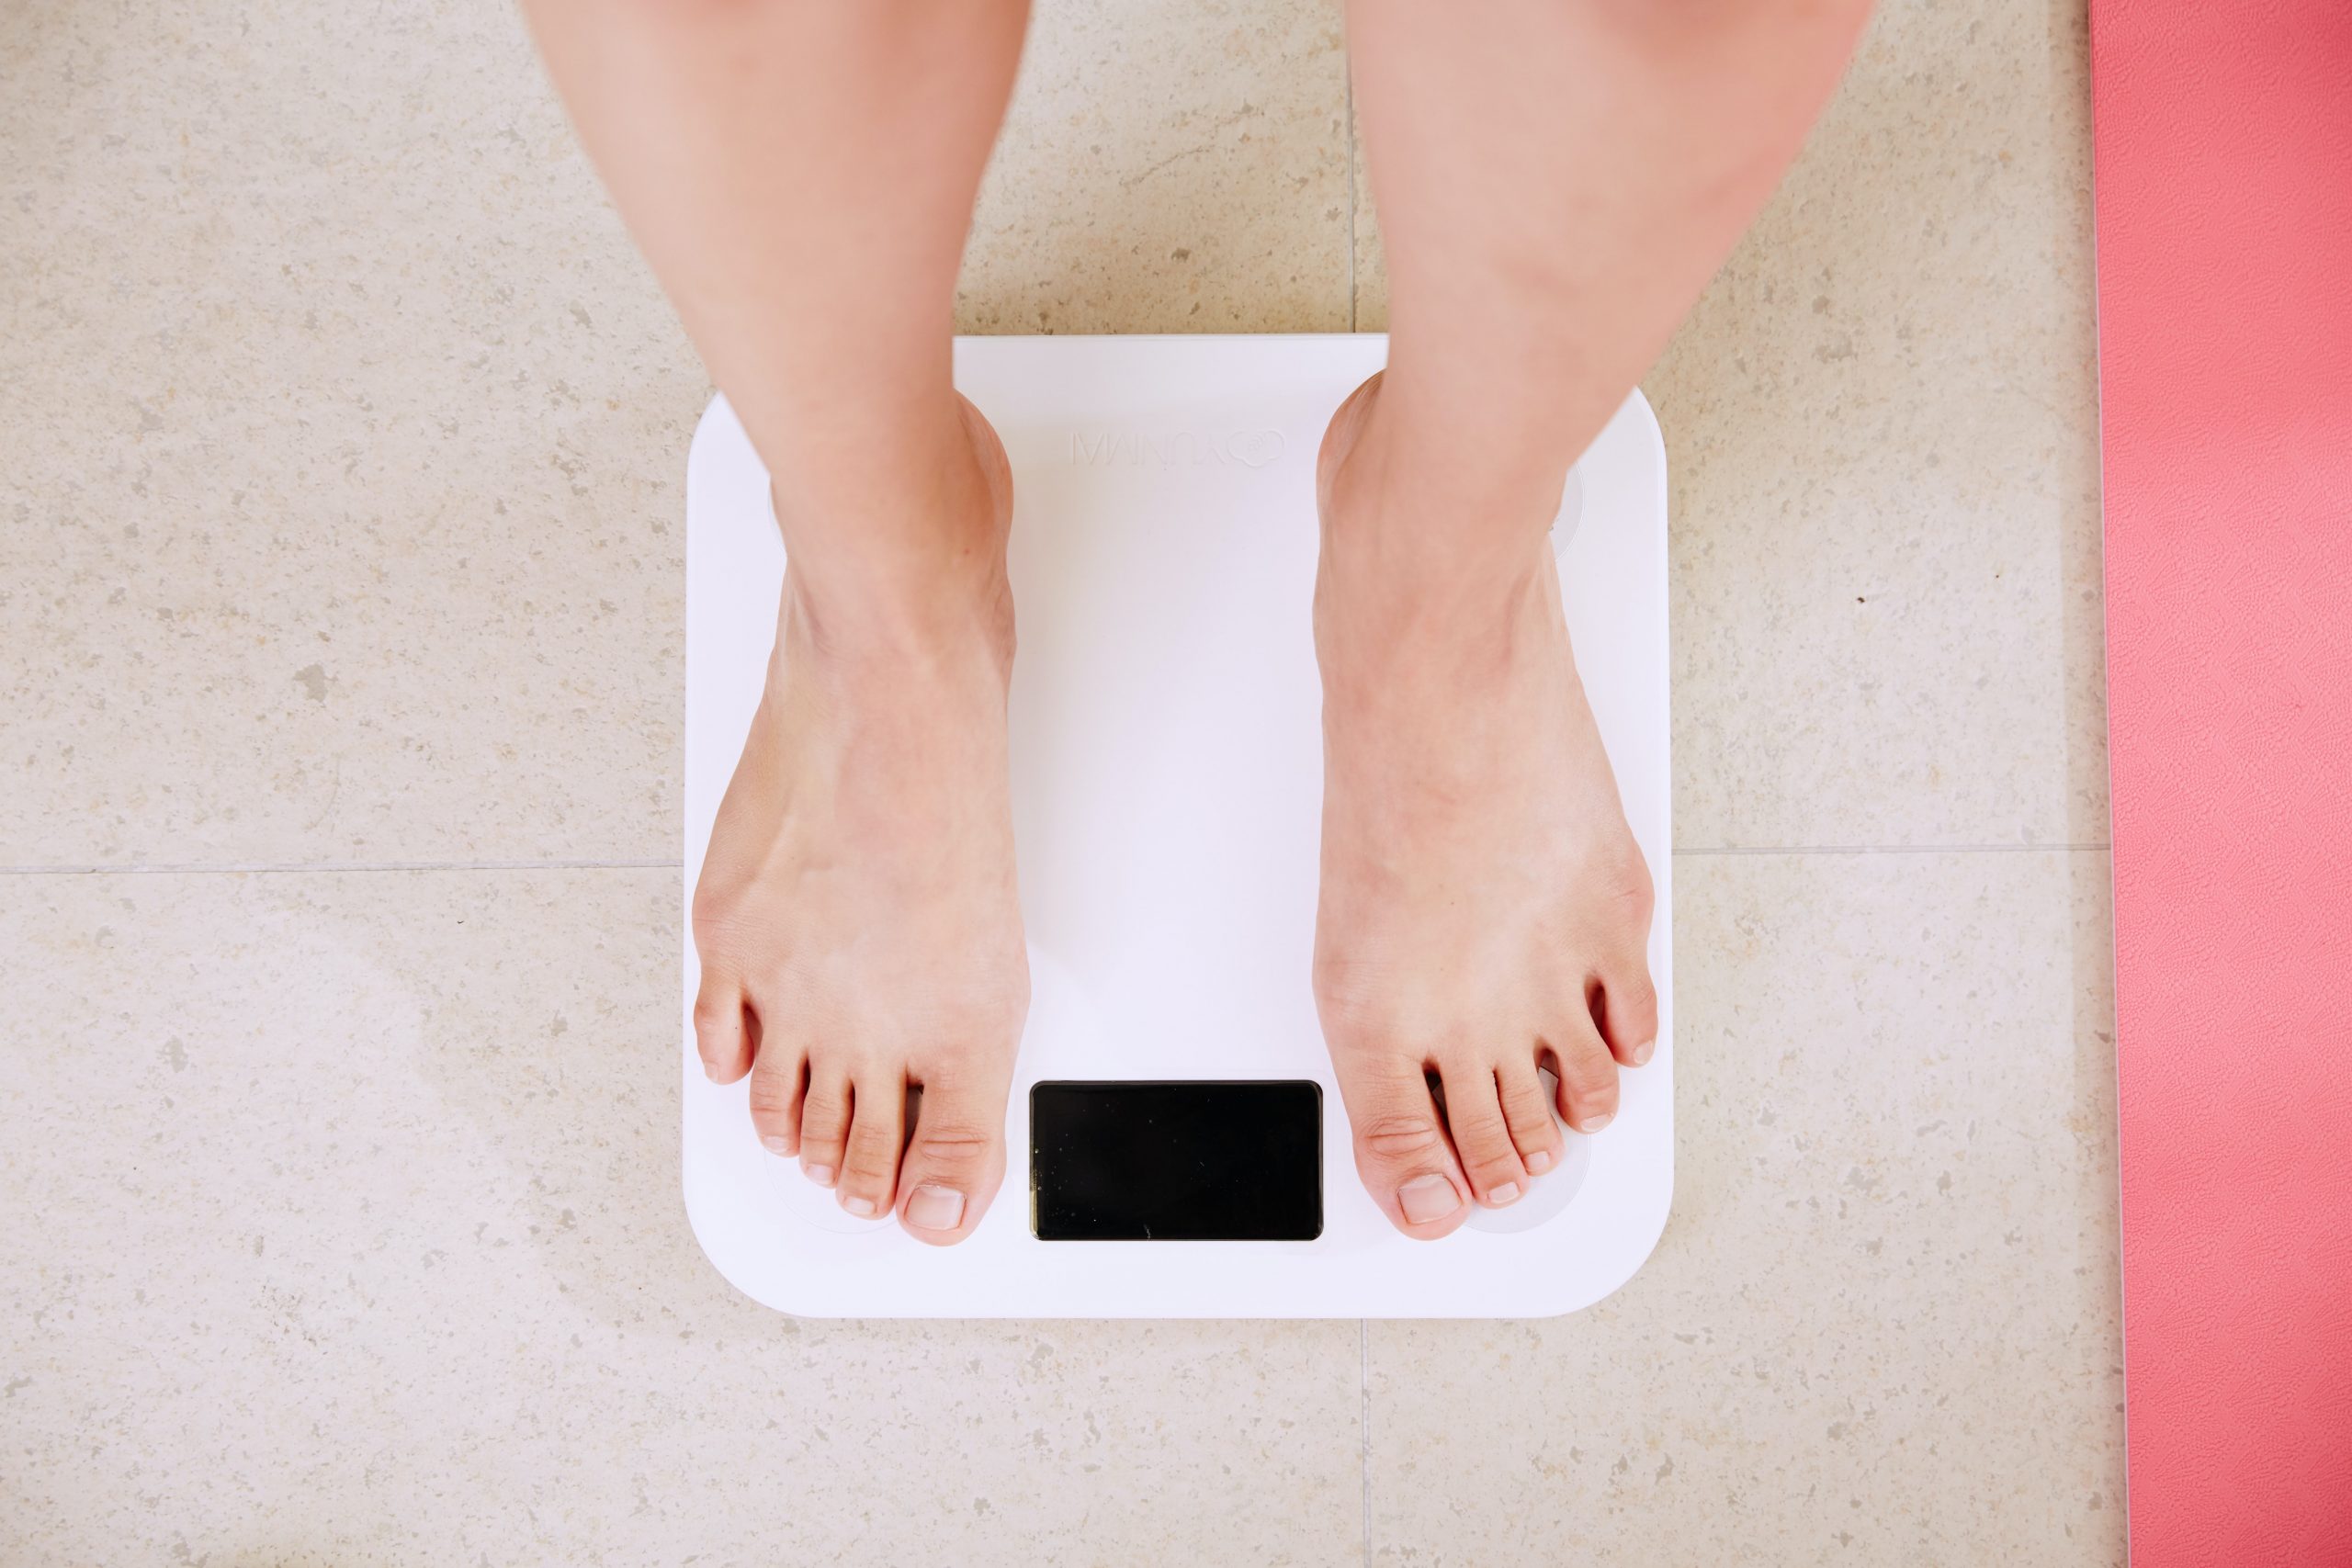 Weight Control & Its Impact On Health